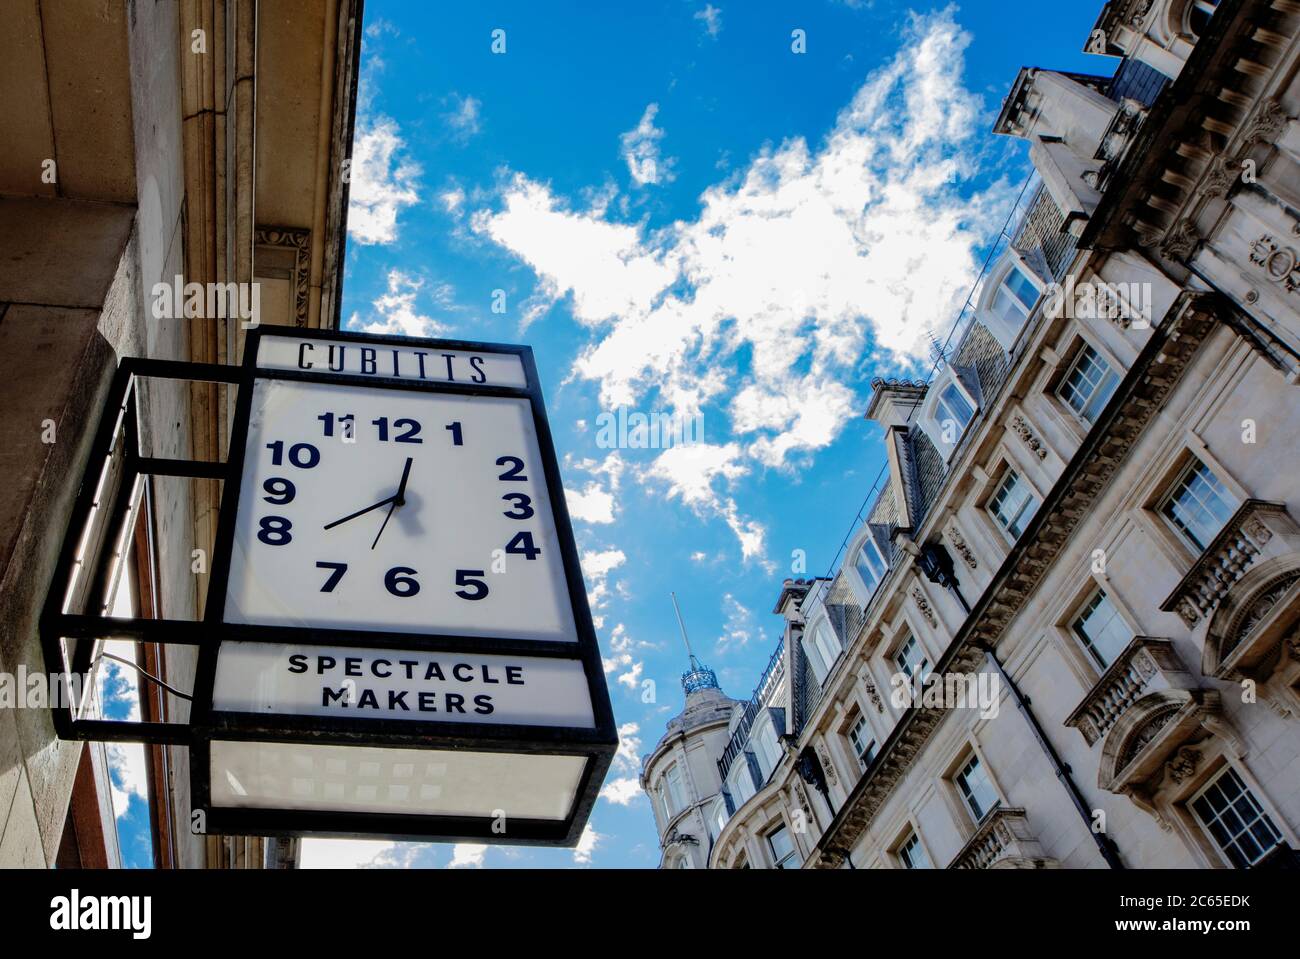 Dramatic cloudscape behind clock sign advertising Cubitt's spectacle makers in Jermyn St, London Stock Photo